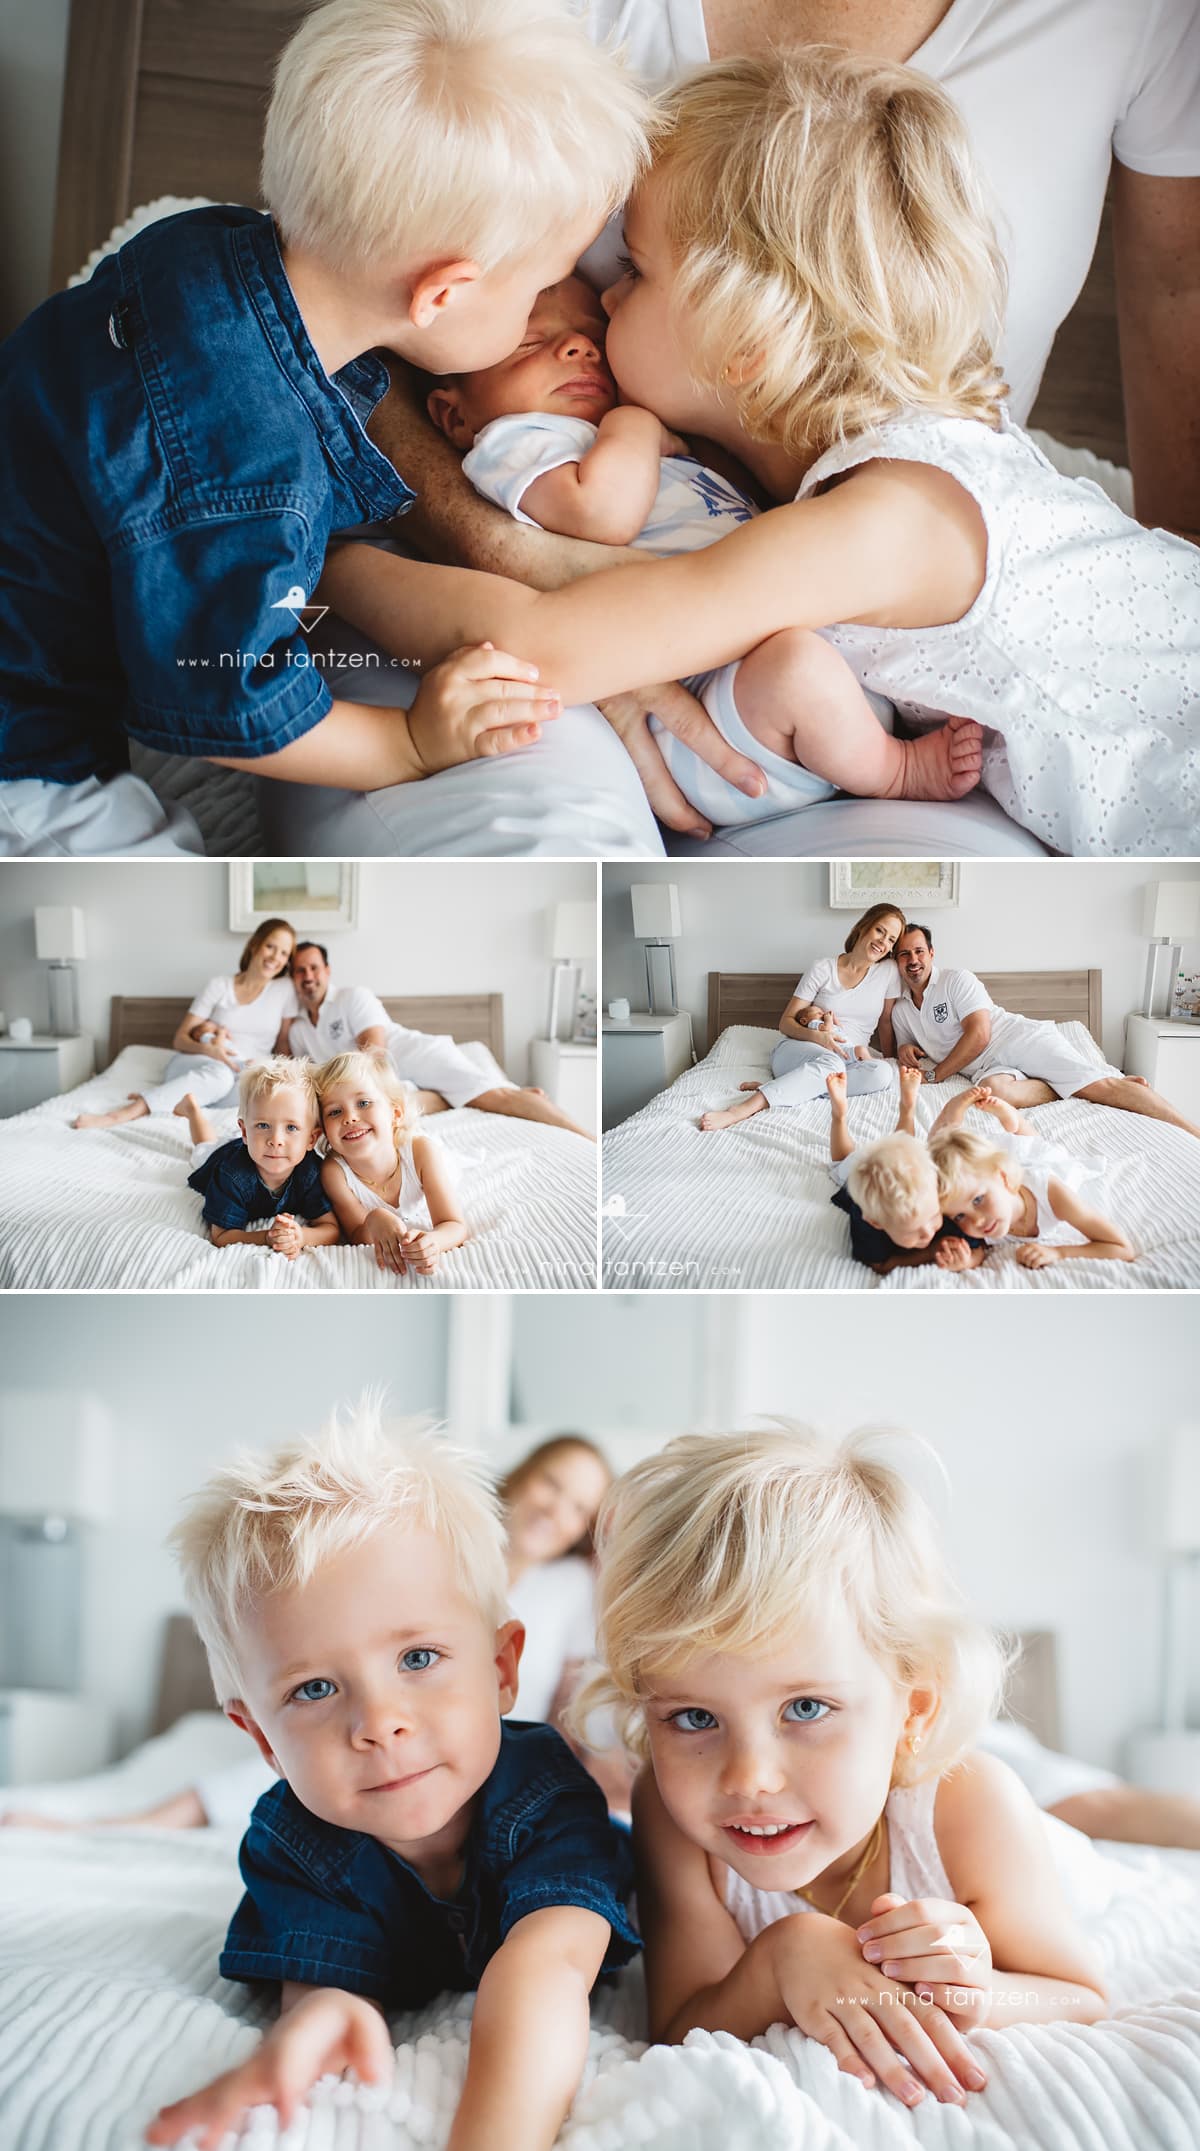 beautiful portraits of a family and their newborn baby boy in singapore